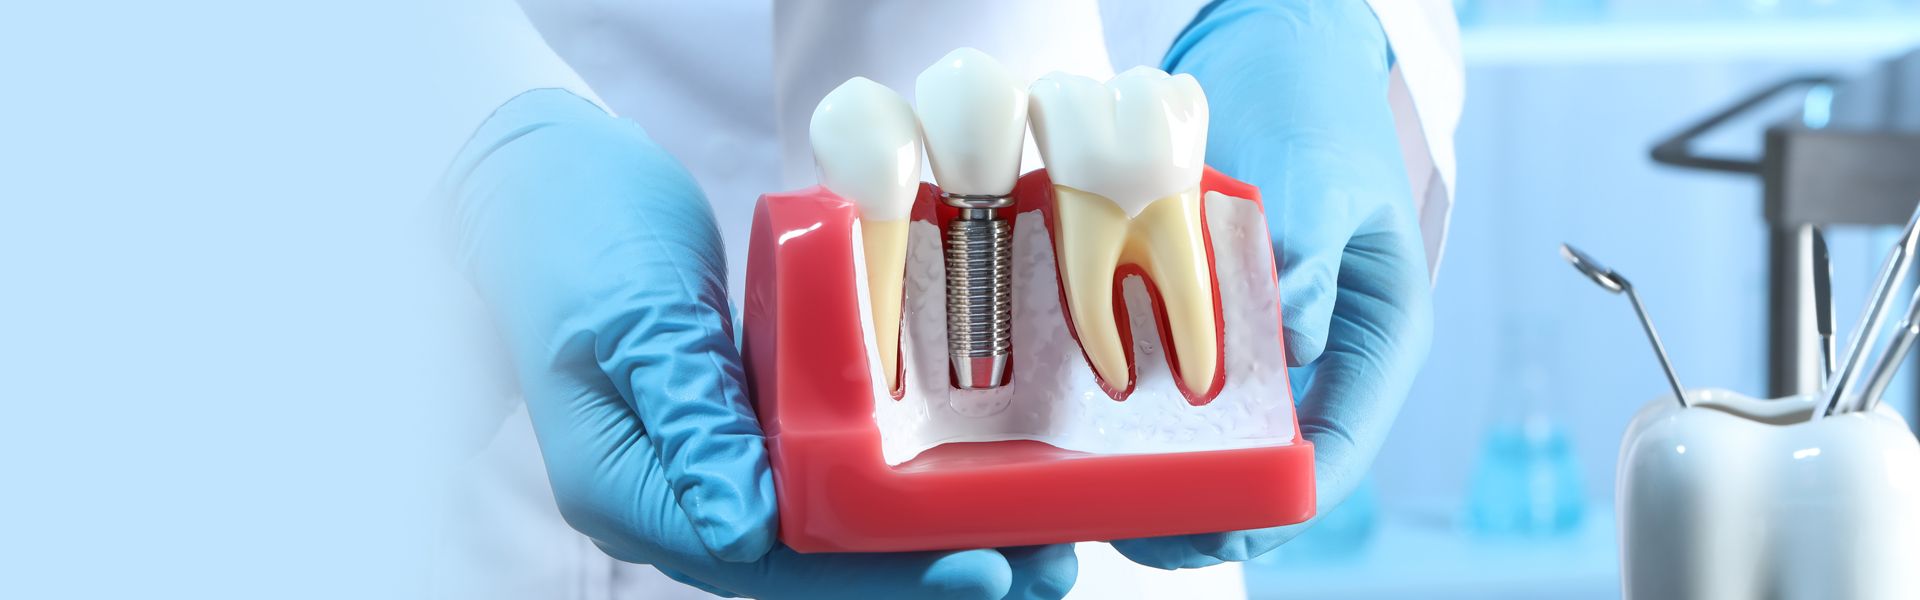 What is a Dental Implant, and How Do Dental Implants Work?